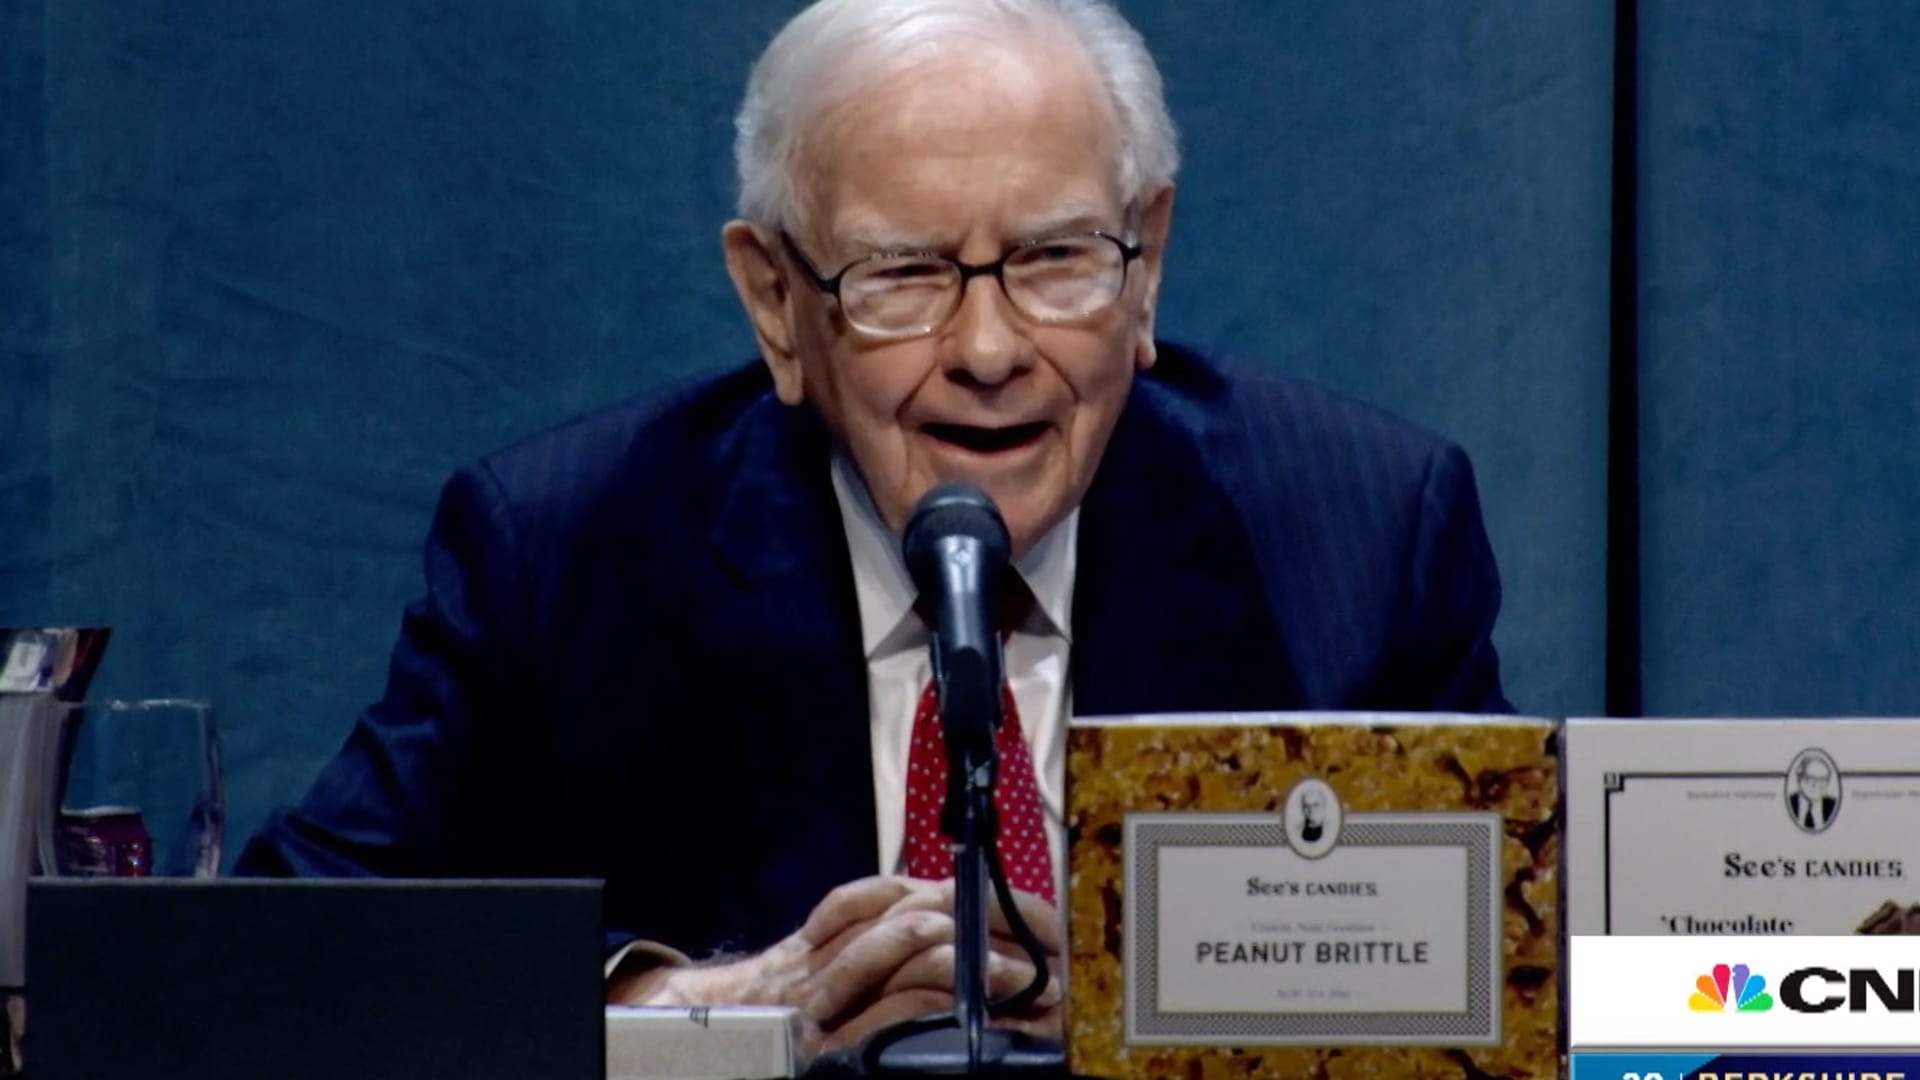 Warren Buffett at press conference during the Berkshire Hathaway Shareholders Meeting, April 30, 2022.